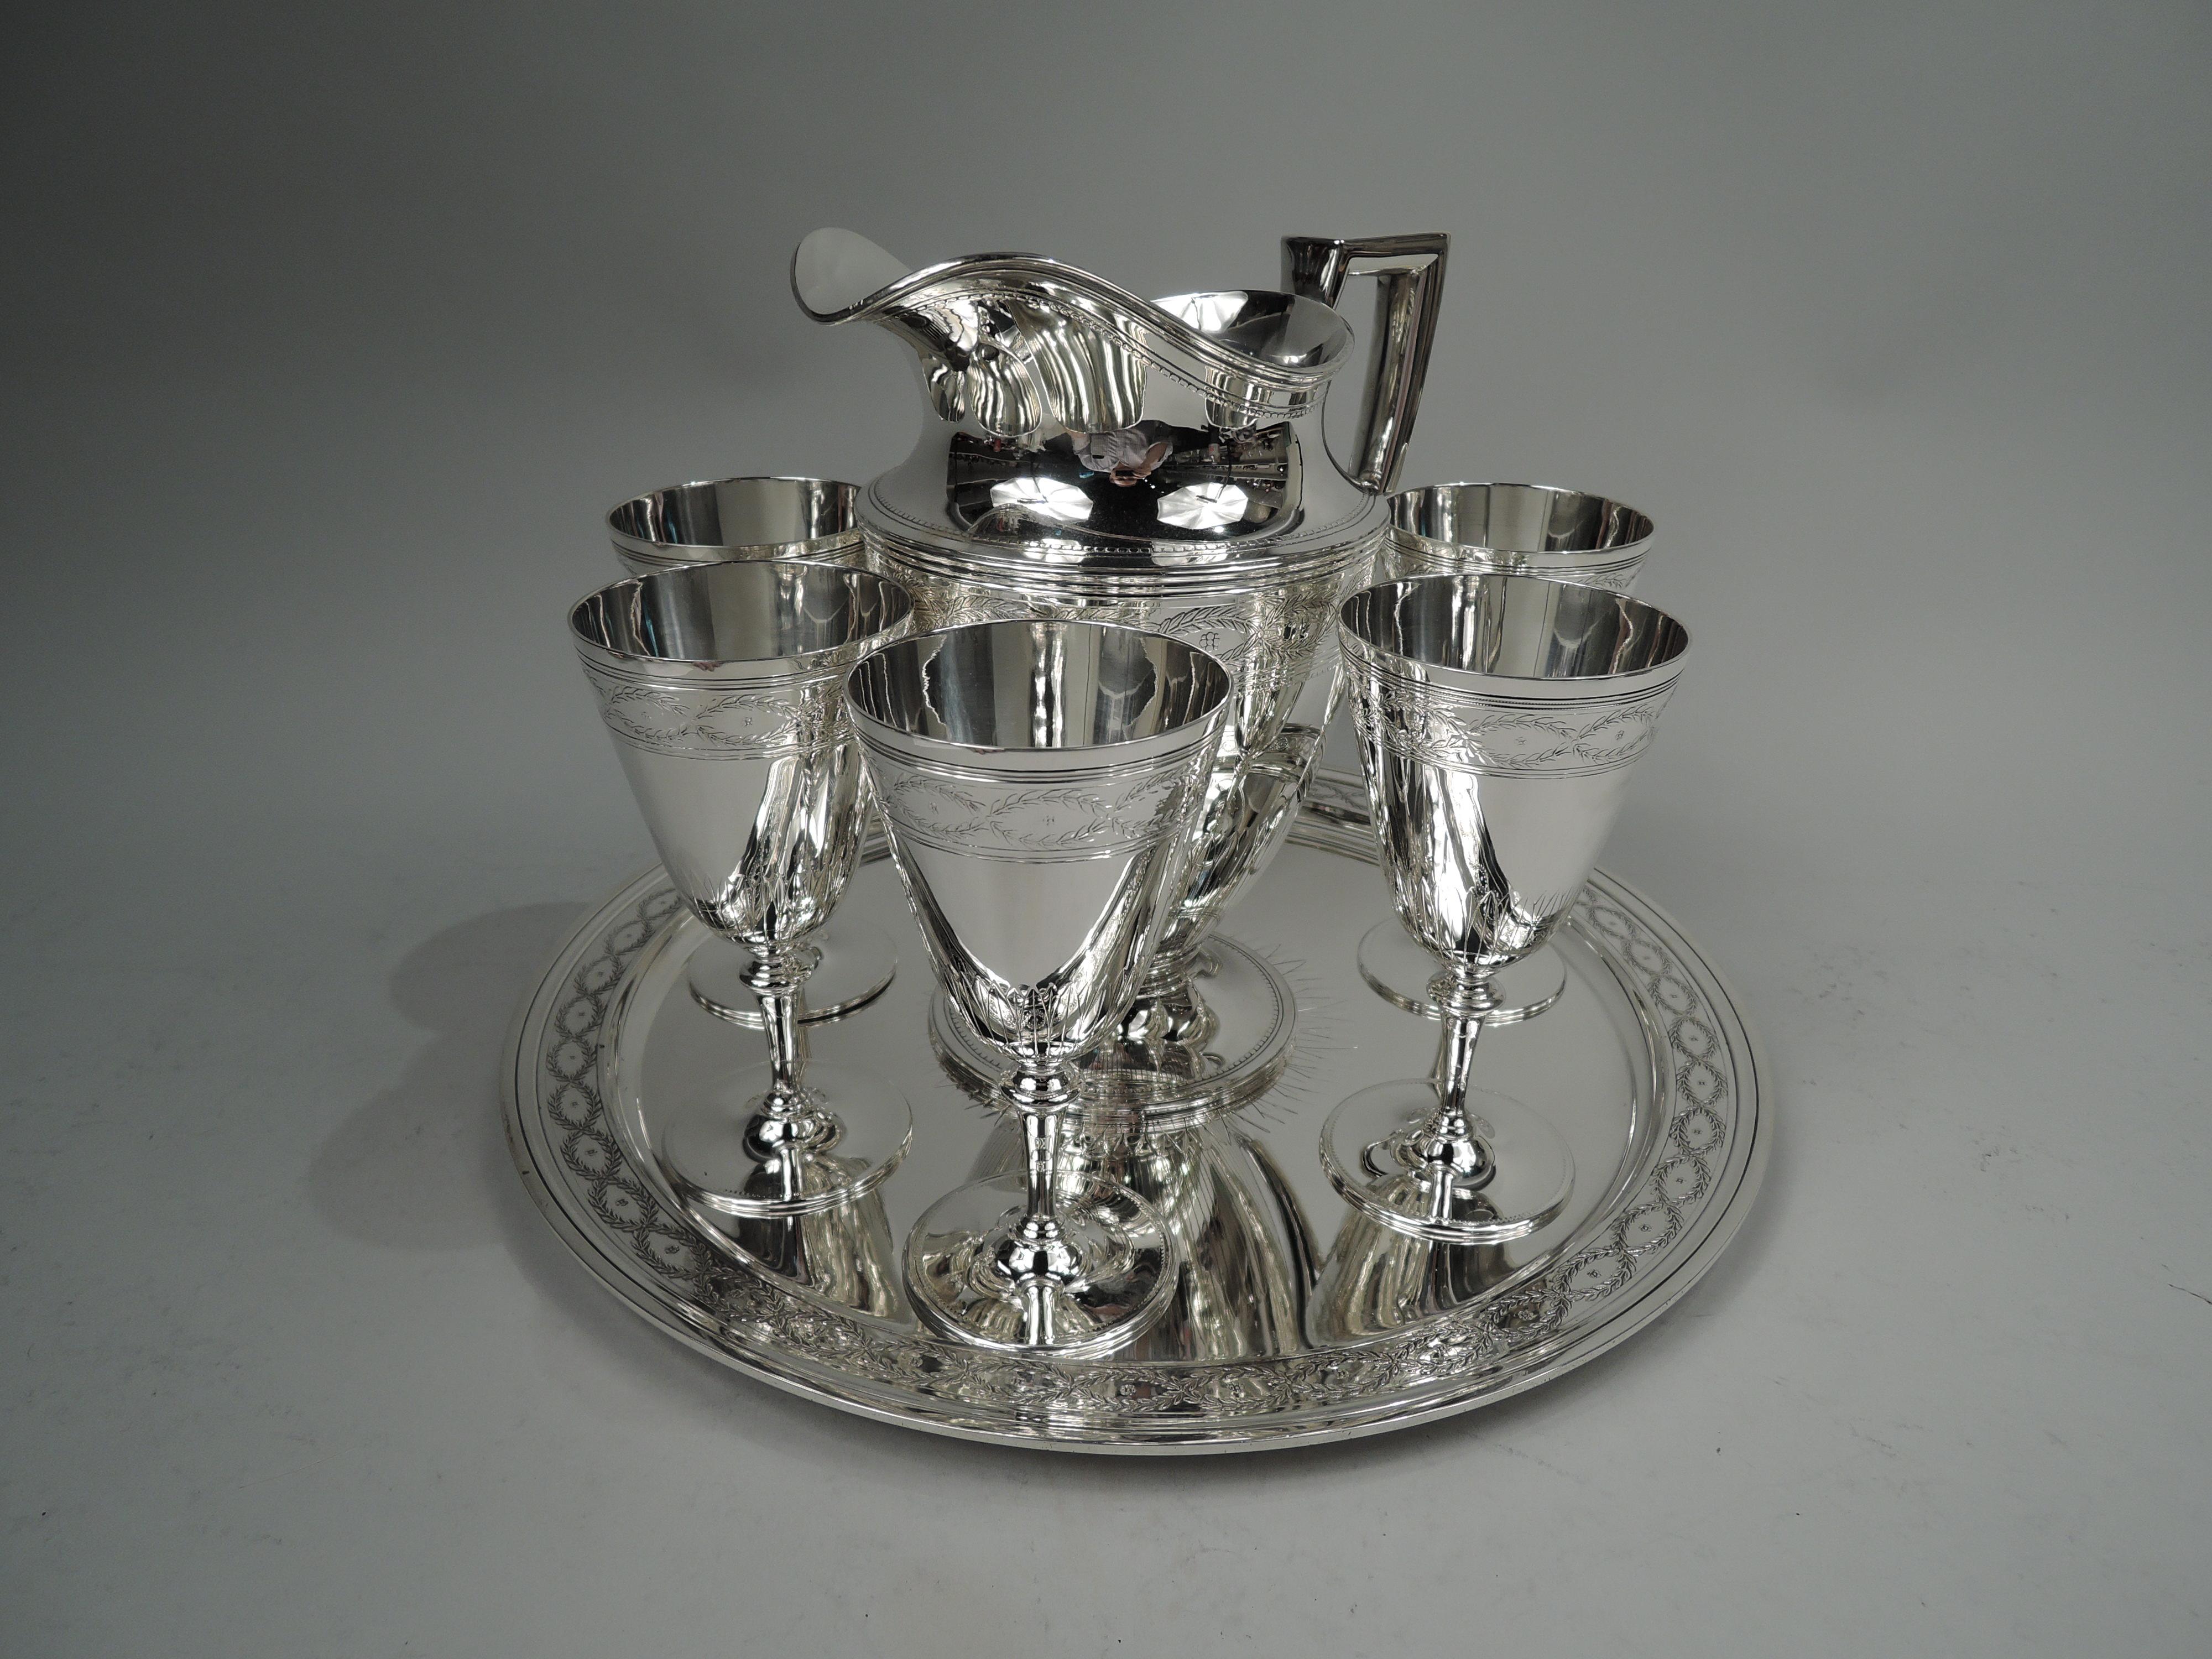 Winthrop sterling silver drinks set. Made by Tiffany & Co. in New York, ca 1925. This set comprises pitcher, 6 goblets and tray. The pitcher has curved and tapering bowl, raised foot, scrolled-bracket handle, and helmet mouth. The goblets have